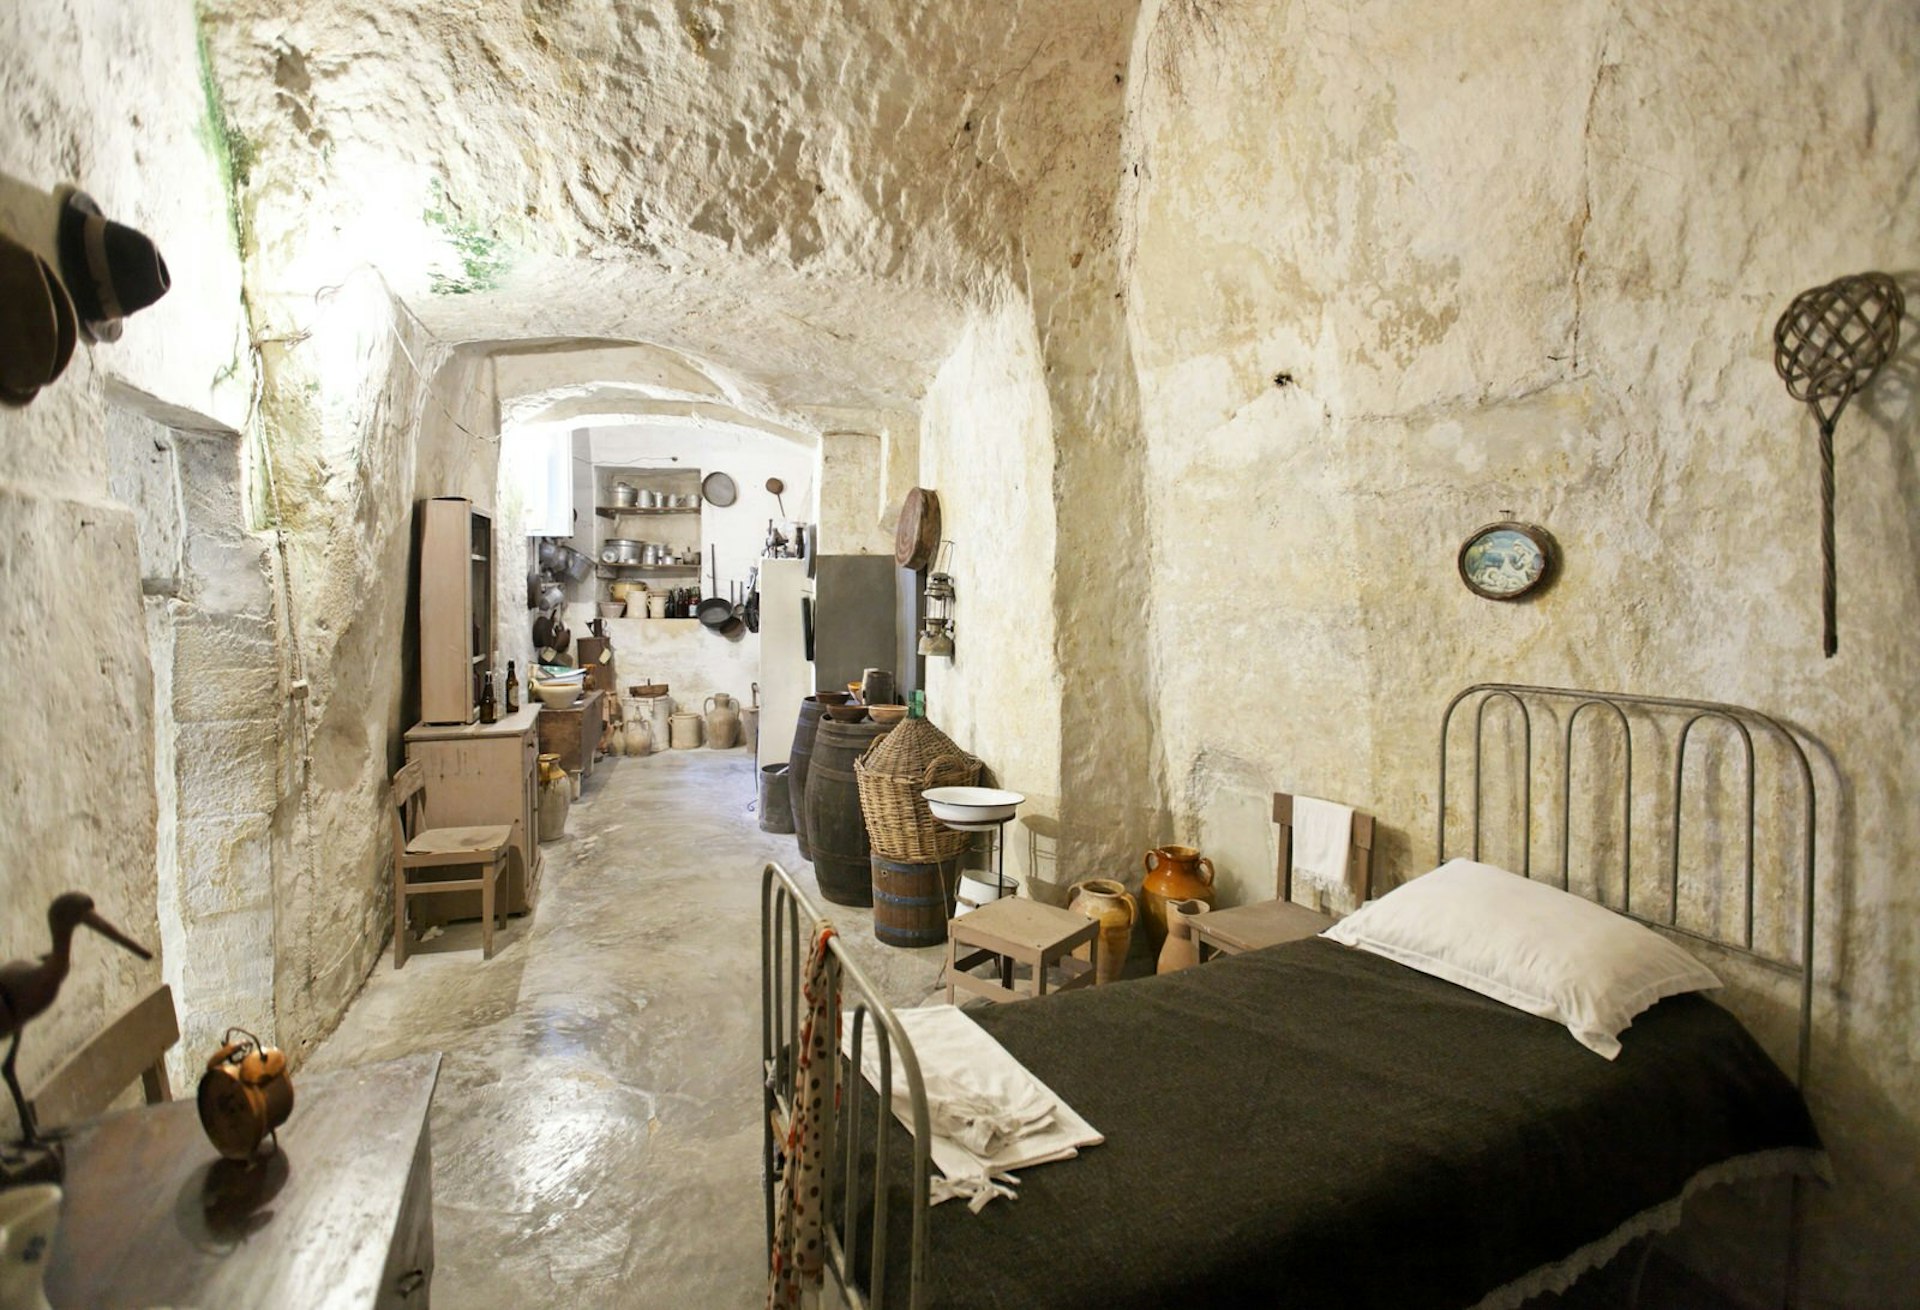 Cave life in Matera was basic